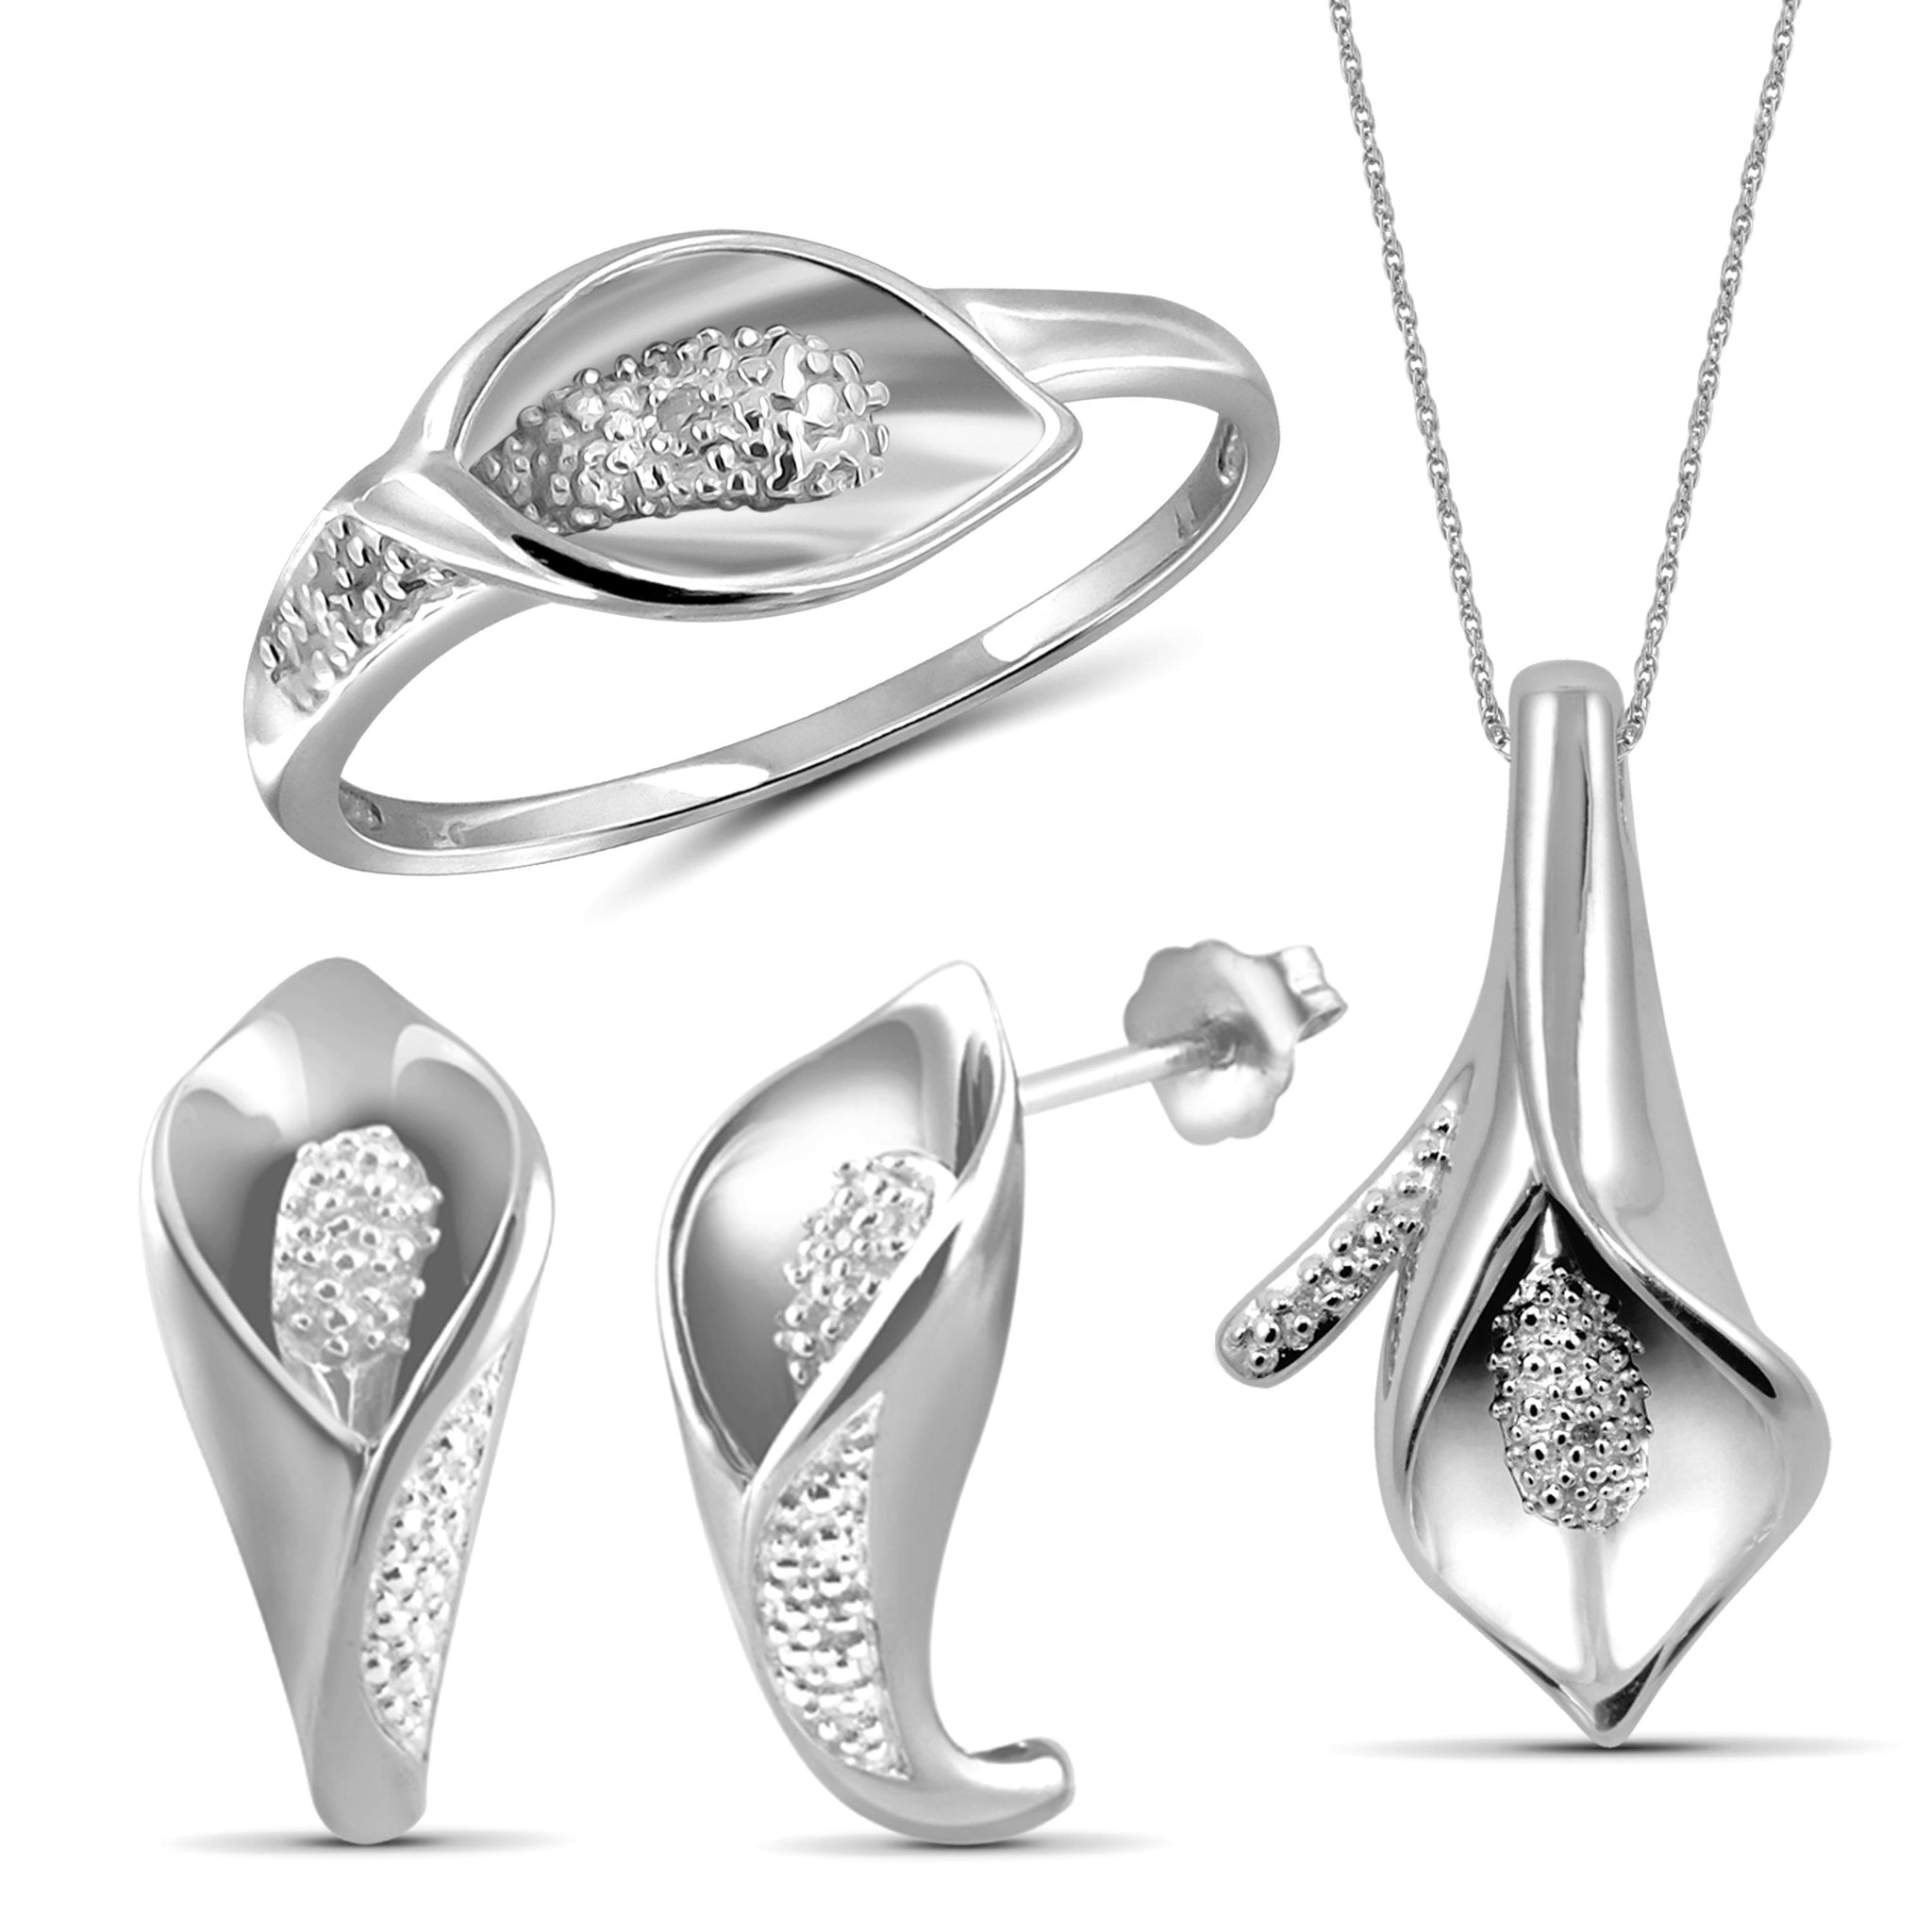 JewelonFire 1/20 Carat T.W. White Diamond Sterling Silver 3 Piece Calla Lily Jewelry Set - Assorted Colors